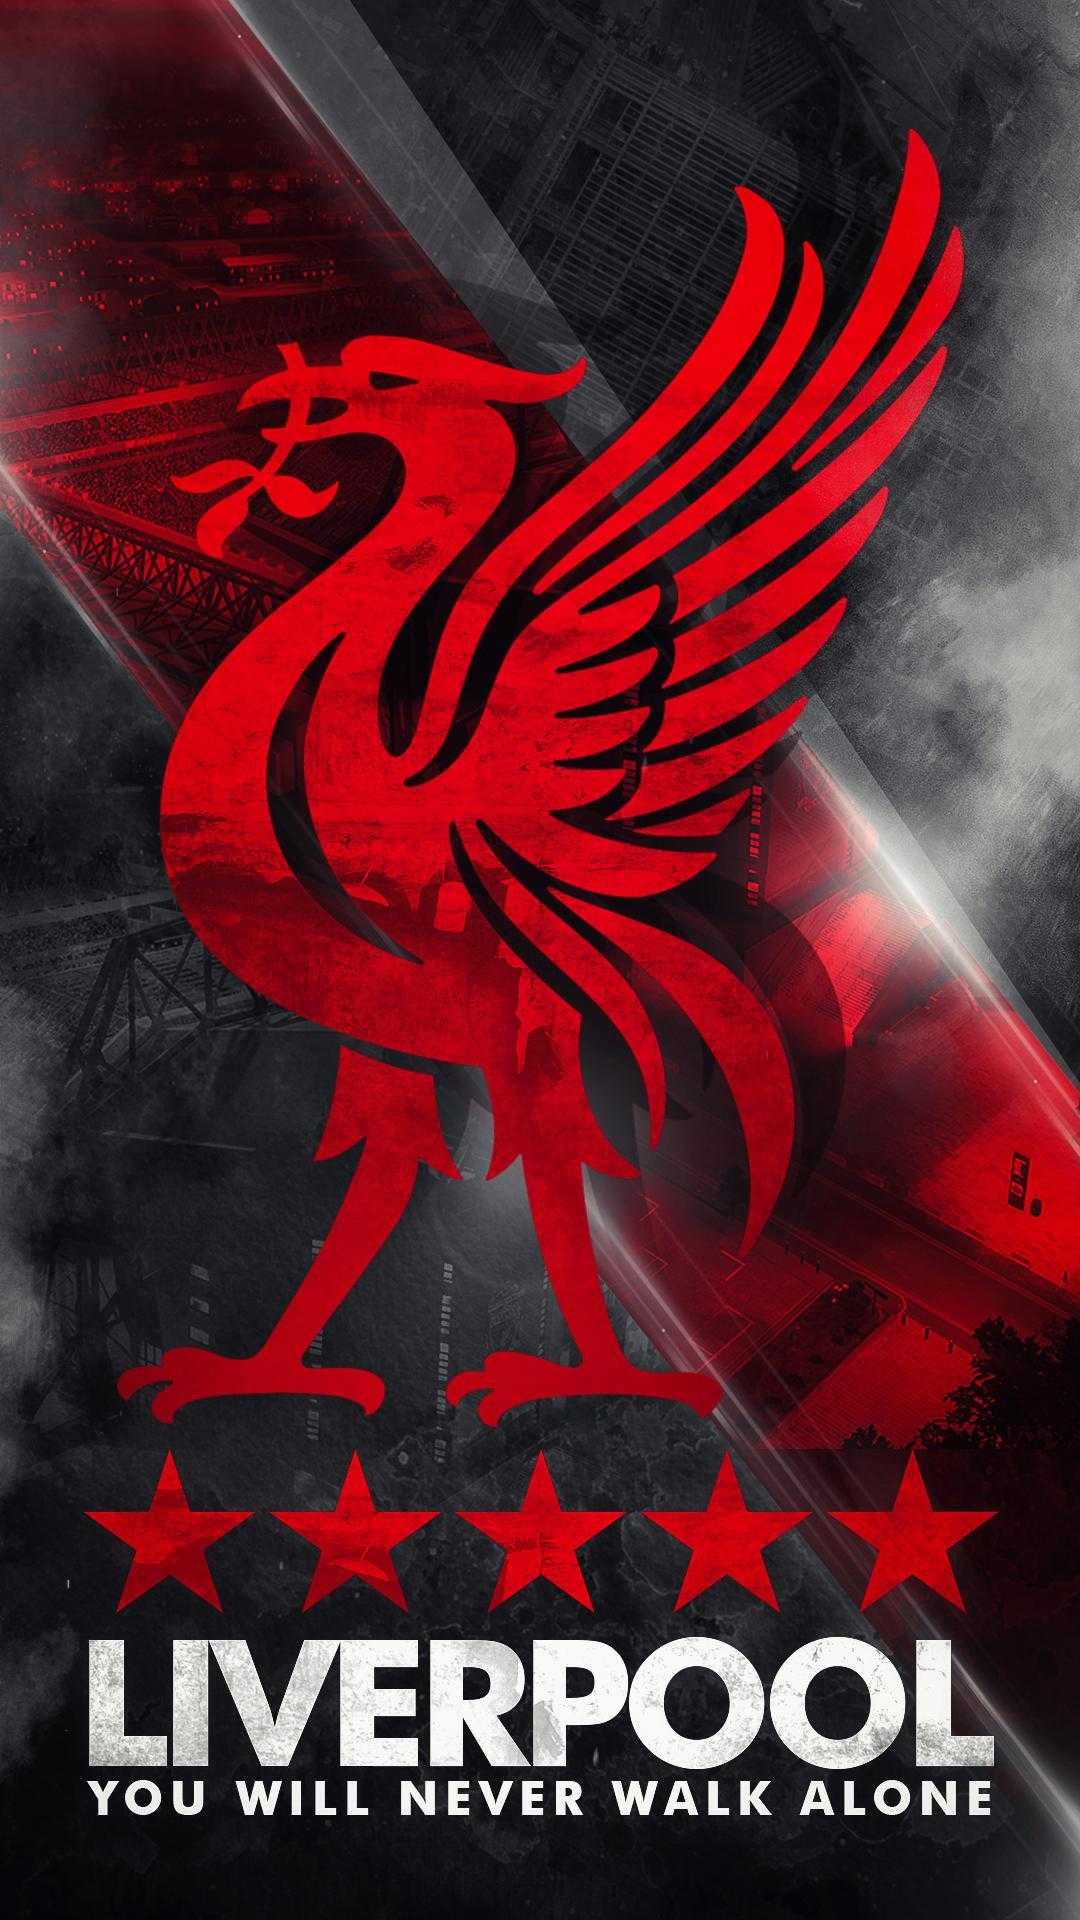 Liverpool Football Club: The iconic red shirt matching the traditional color of the city, Liver bird. 1080x1920 Full HD Wallpaper.